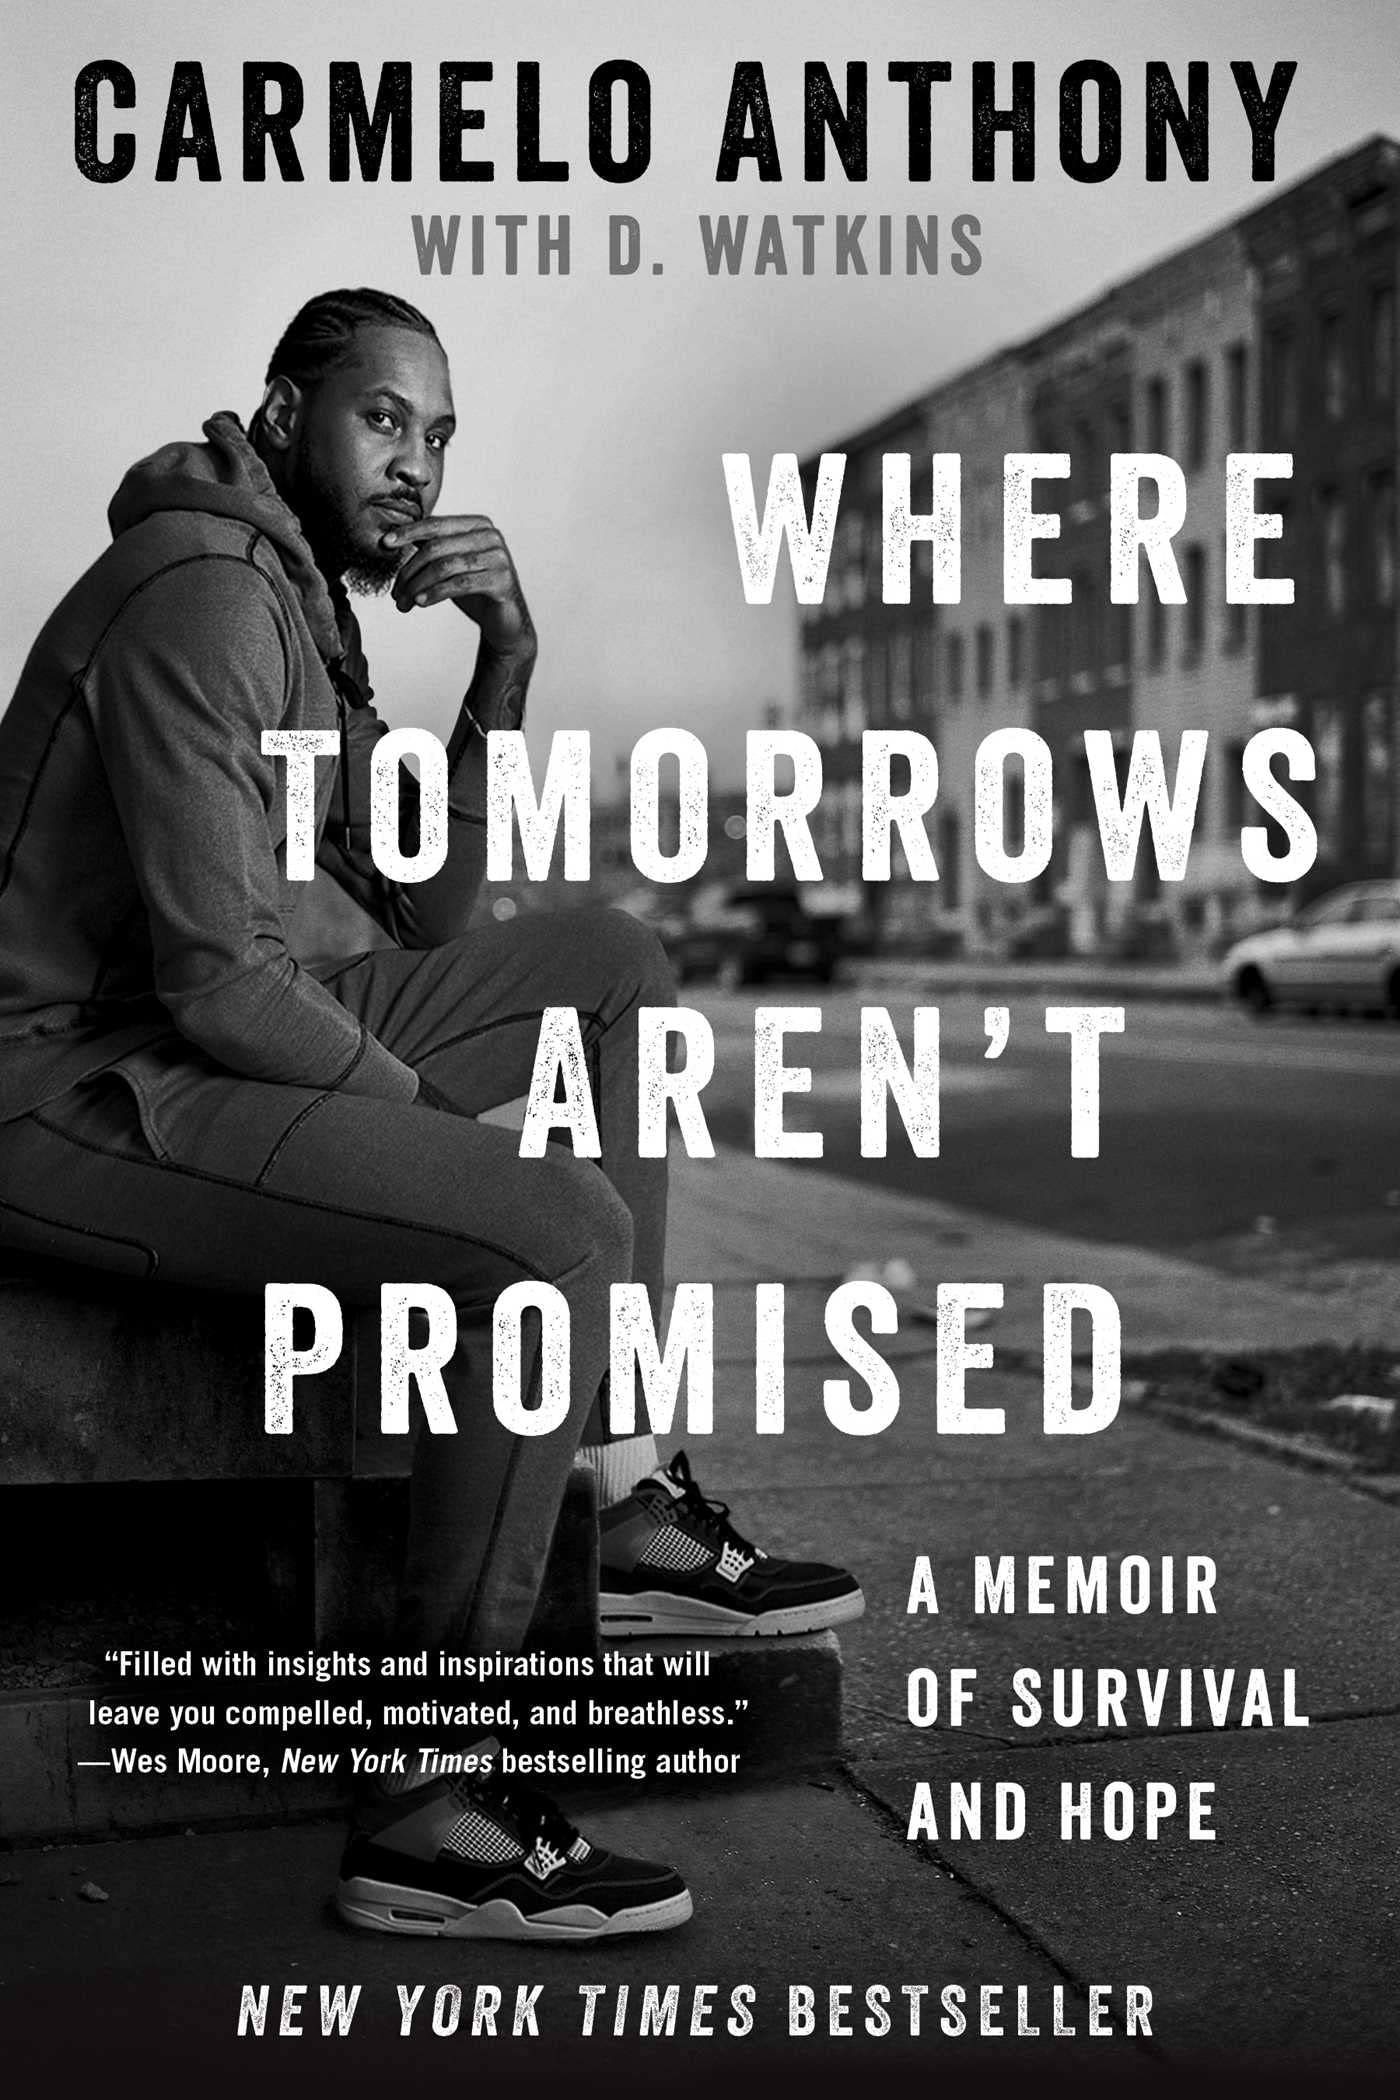 Where Tomorrows Aren't Promised: A Memoir of Survival and Hope SureShot Books